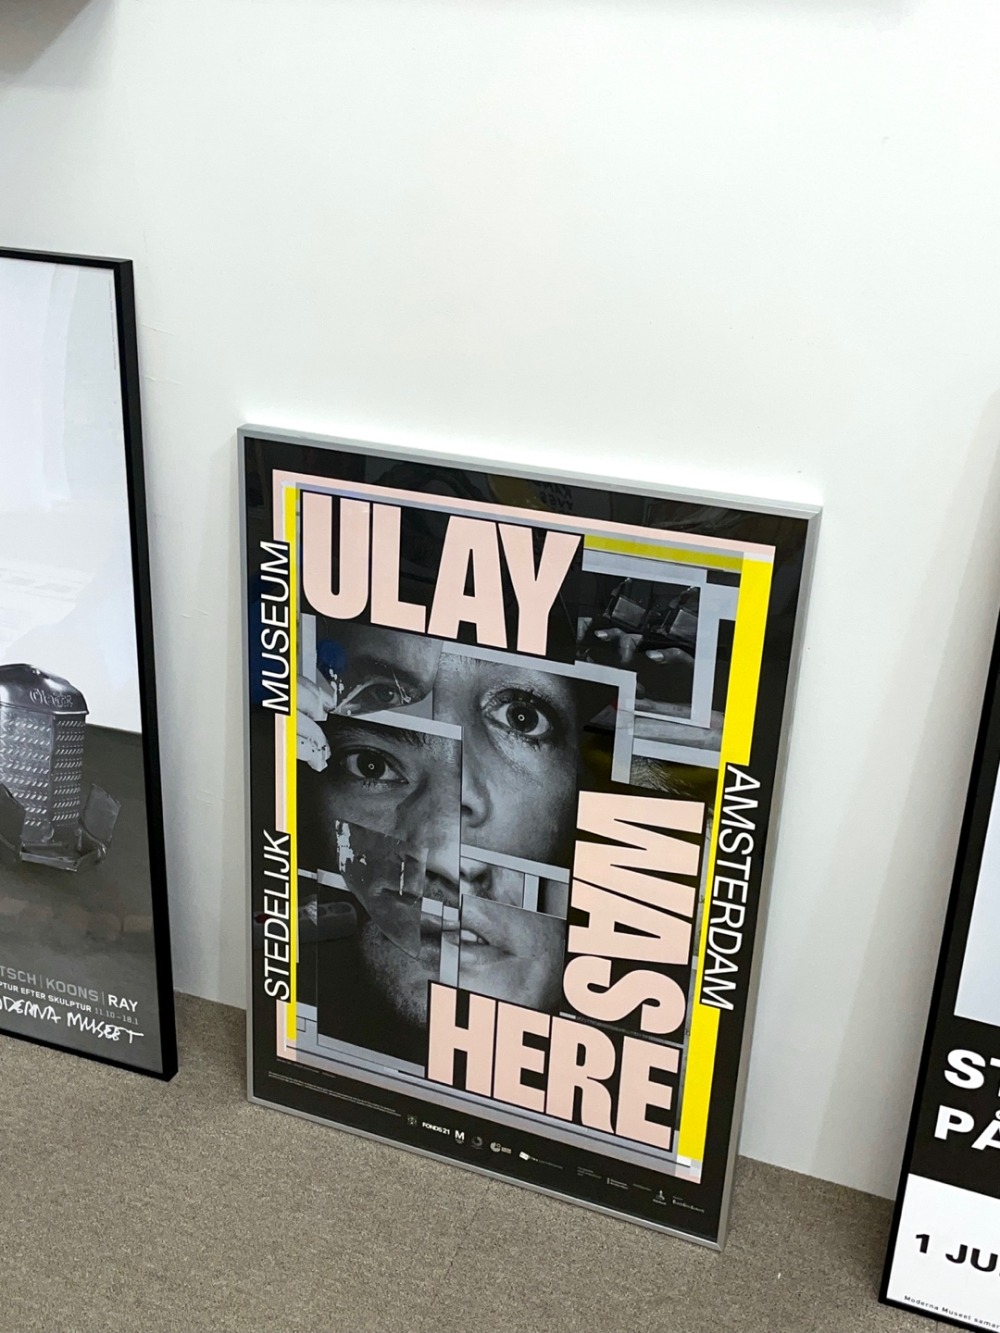 Ulay Was Here – Meet the master of No Compromise